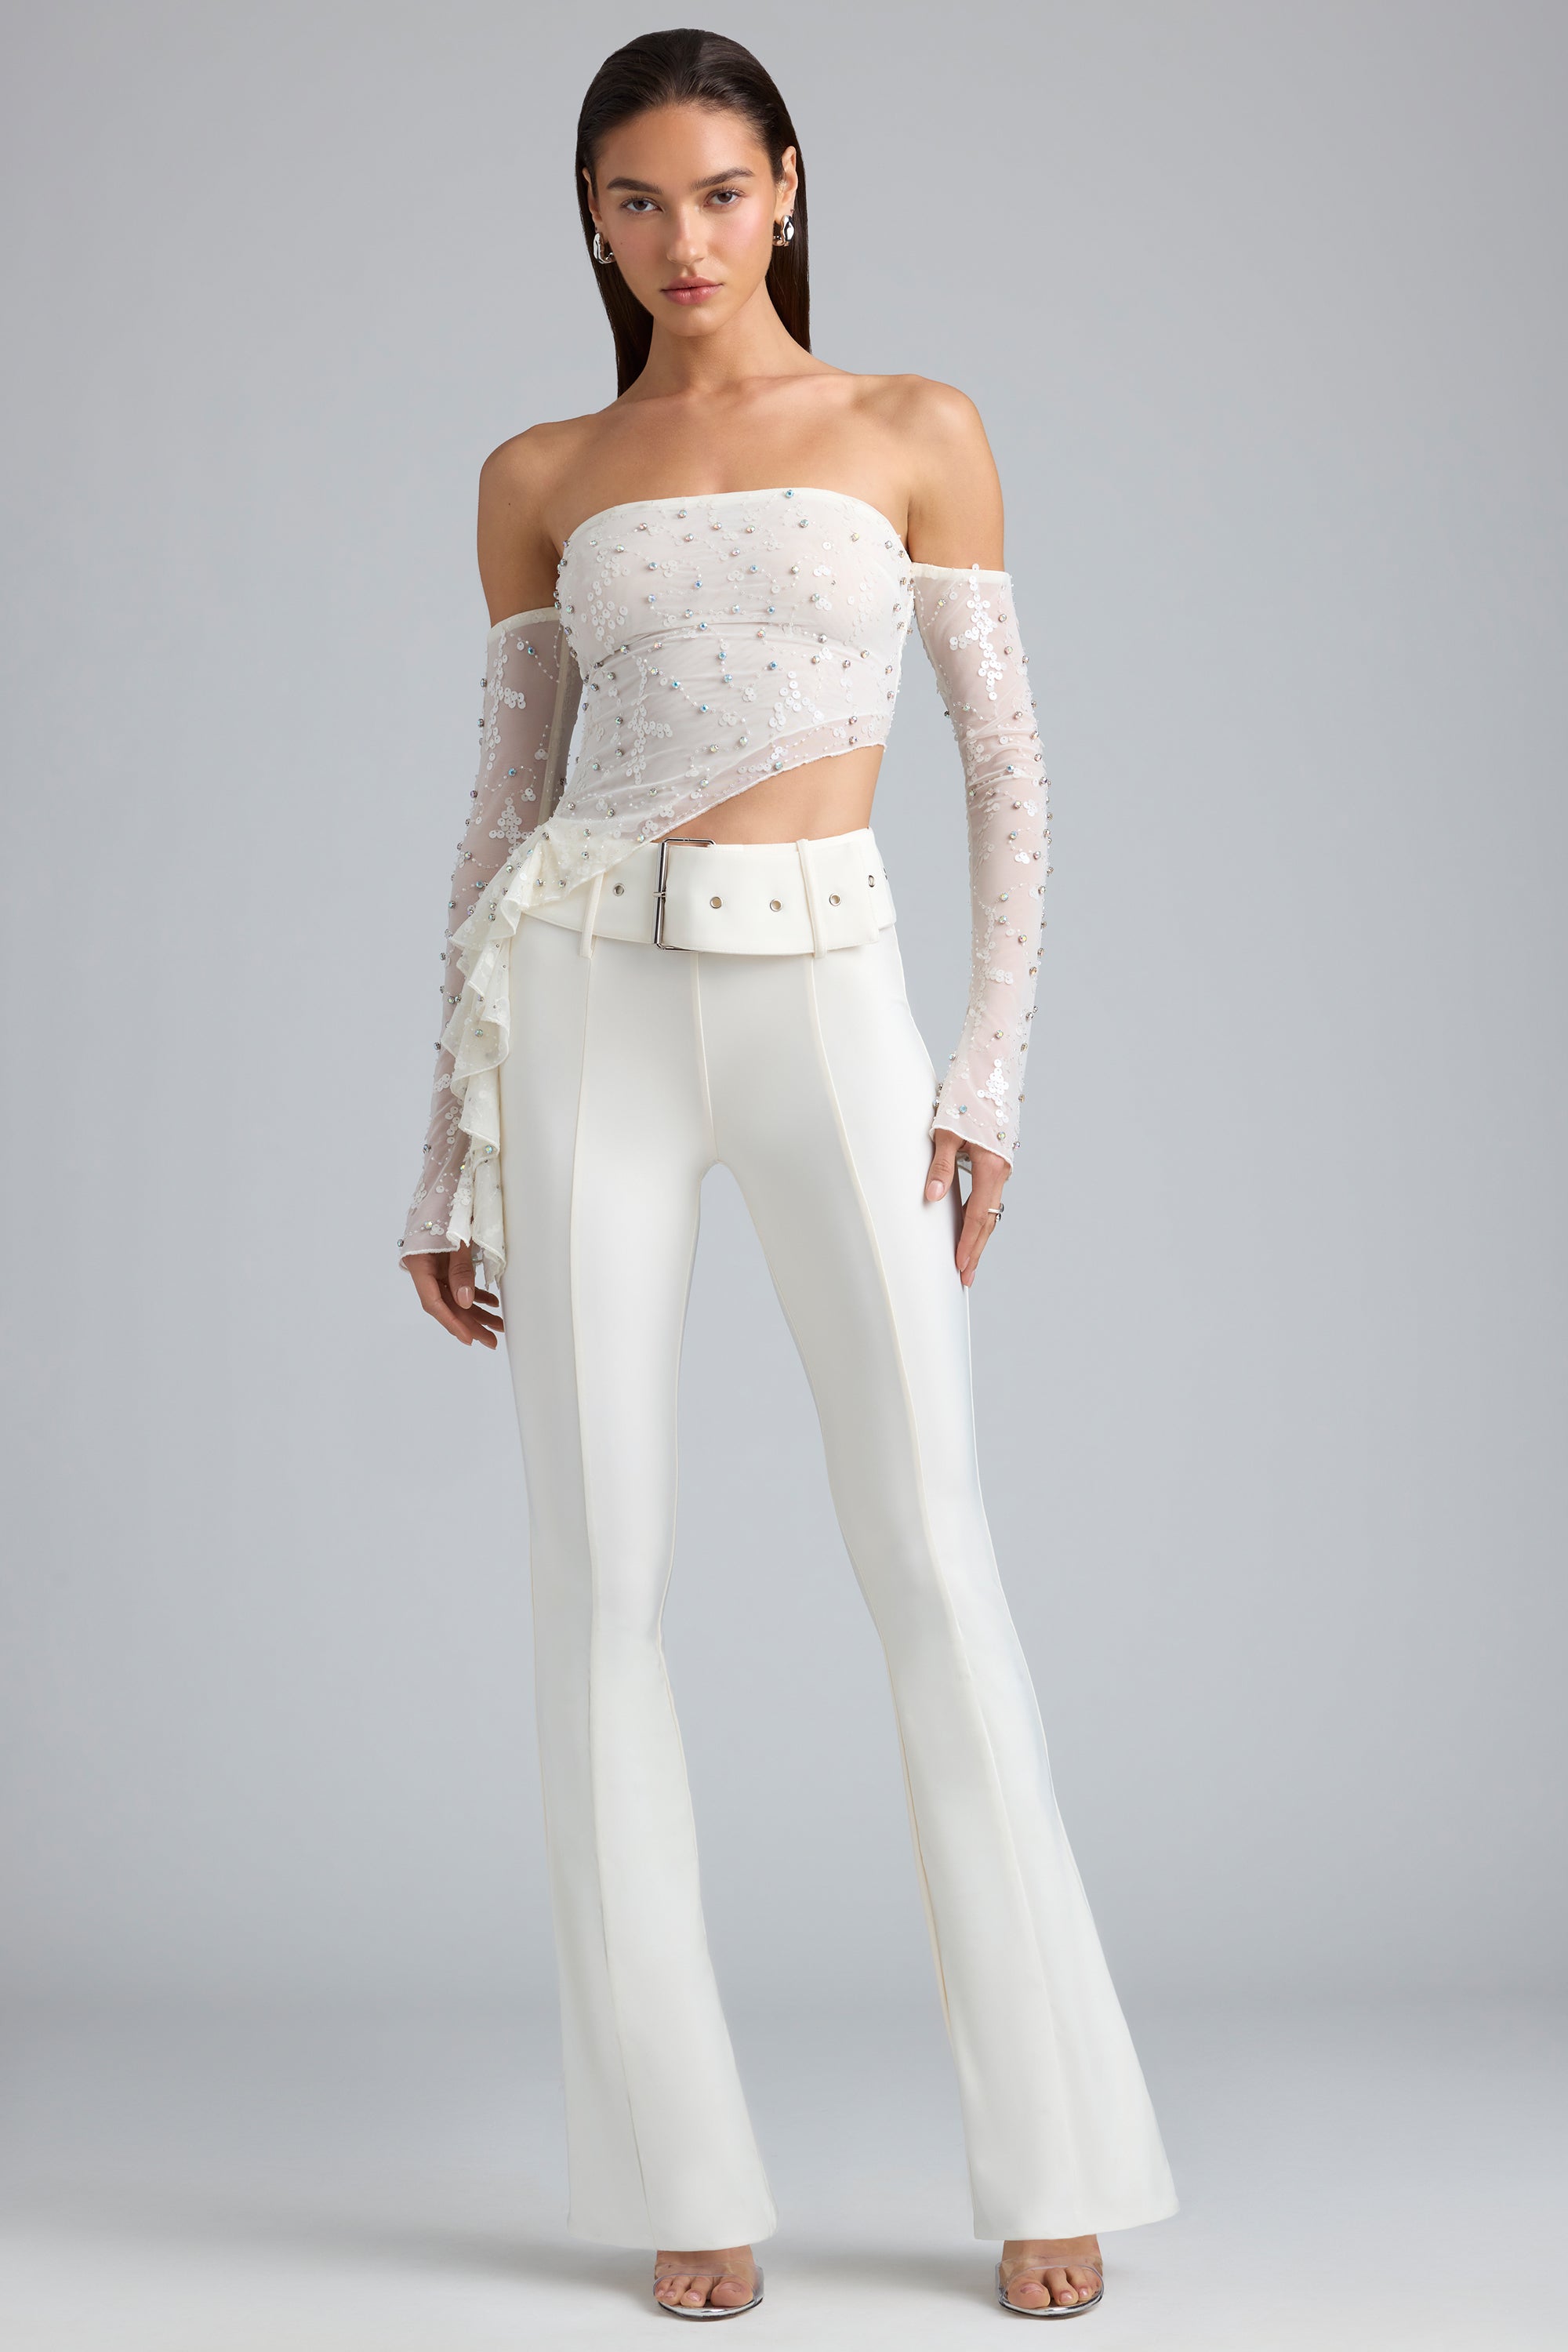 XFLWAM Womens Palazzo Long Pants High Waist Belted Wide Leg Stretchy Loose  Fit Casual Trousers with Pocket White S - Walmart.com